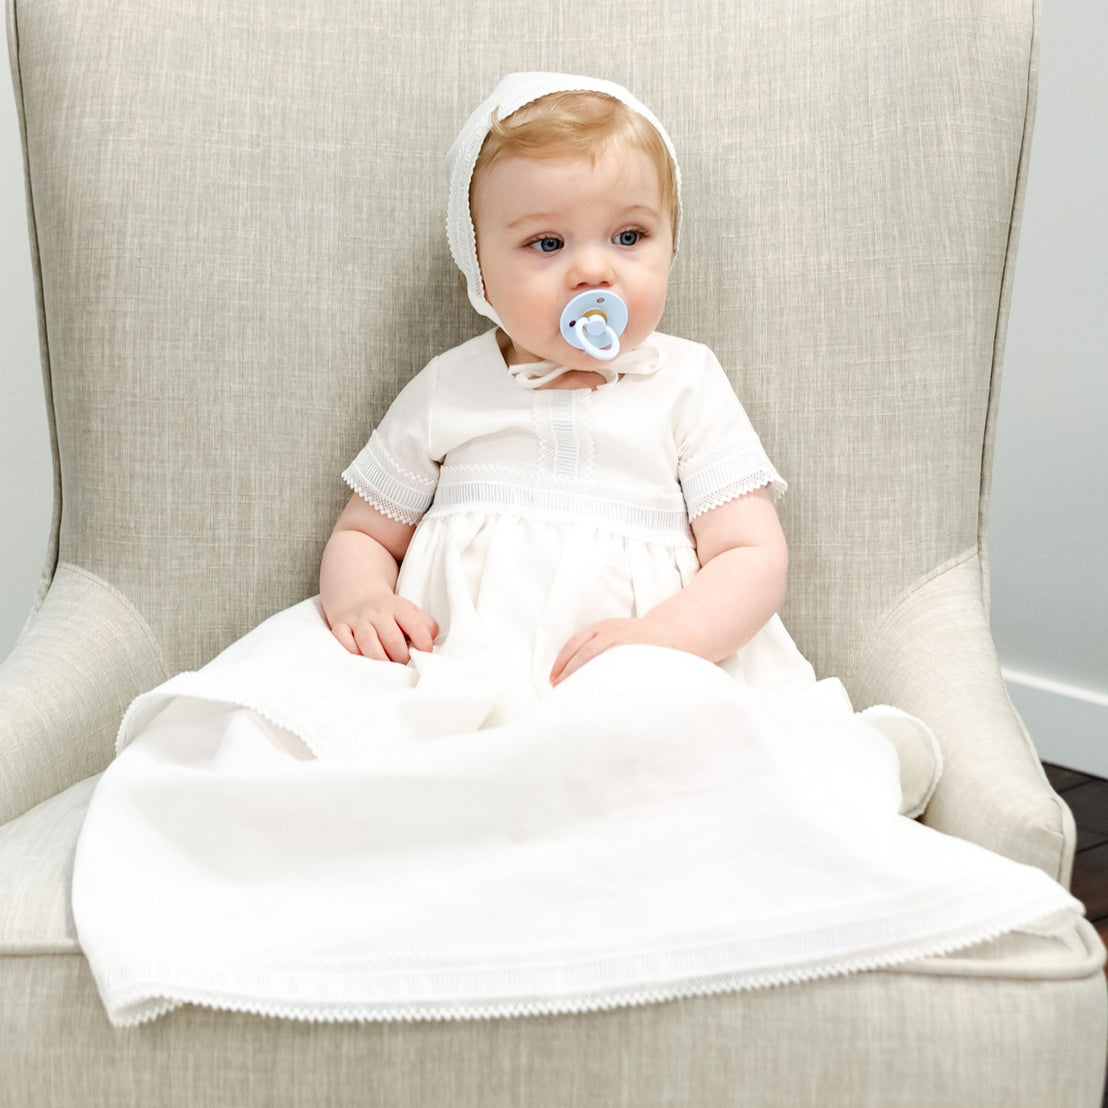 Baby boy dressed in a linen baptism gown sitting in chair with pacifier in mouth. 